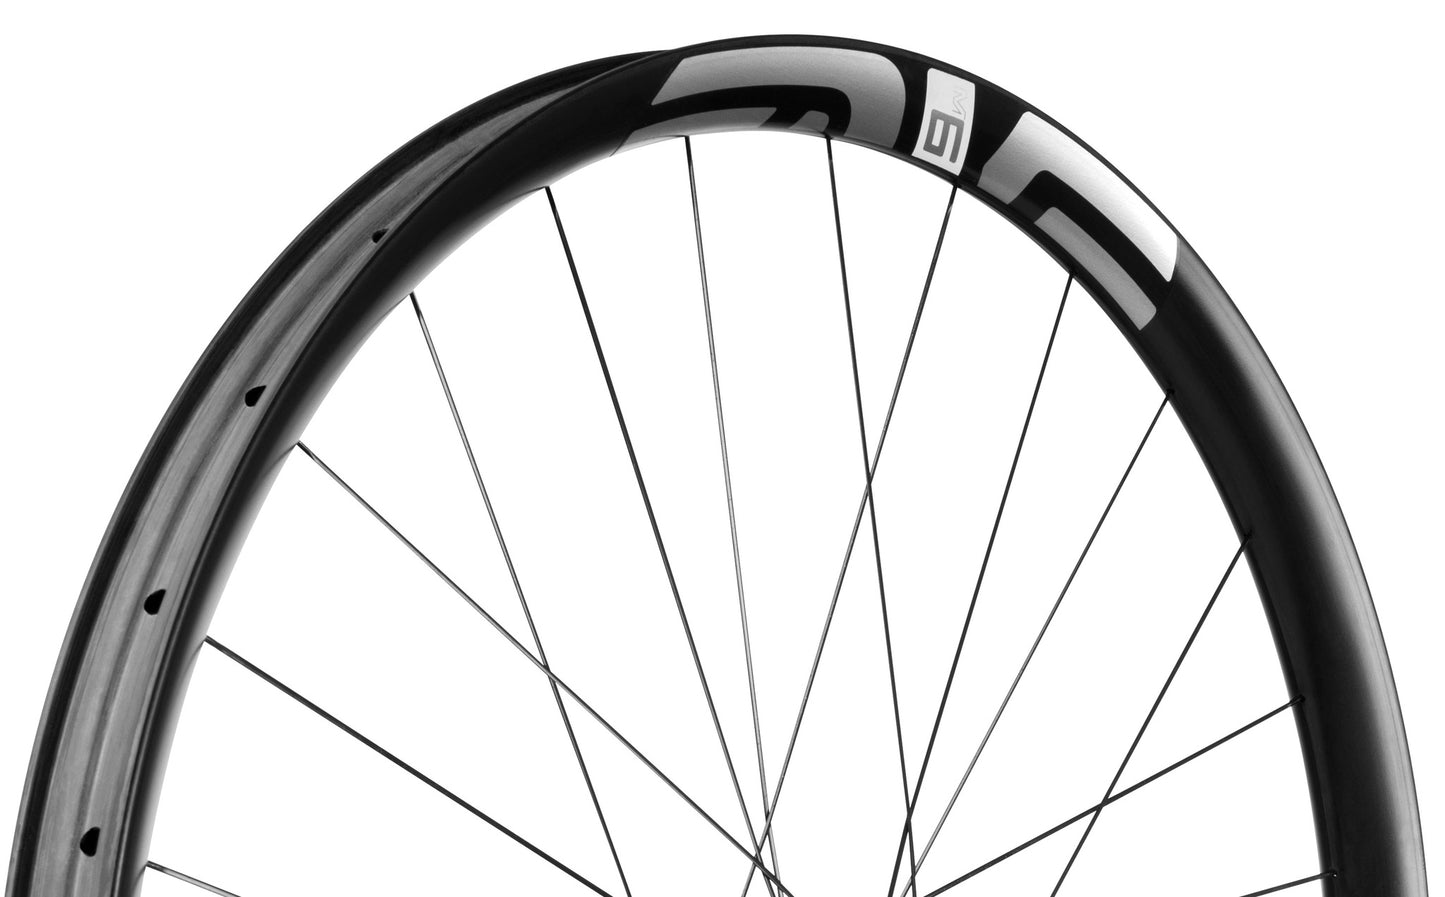 ENVE, M635, WHEEL, SET, 27.5'', F: 28, R: 28 SPOKES, F: 15MM, R: 12MM, F: 110, R: 148, SRAM XD, DISC IS 6-BOLT